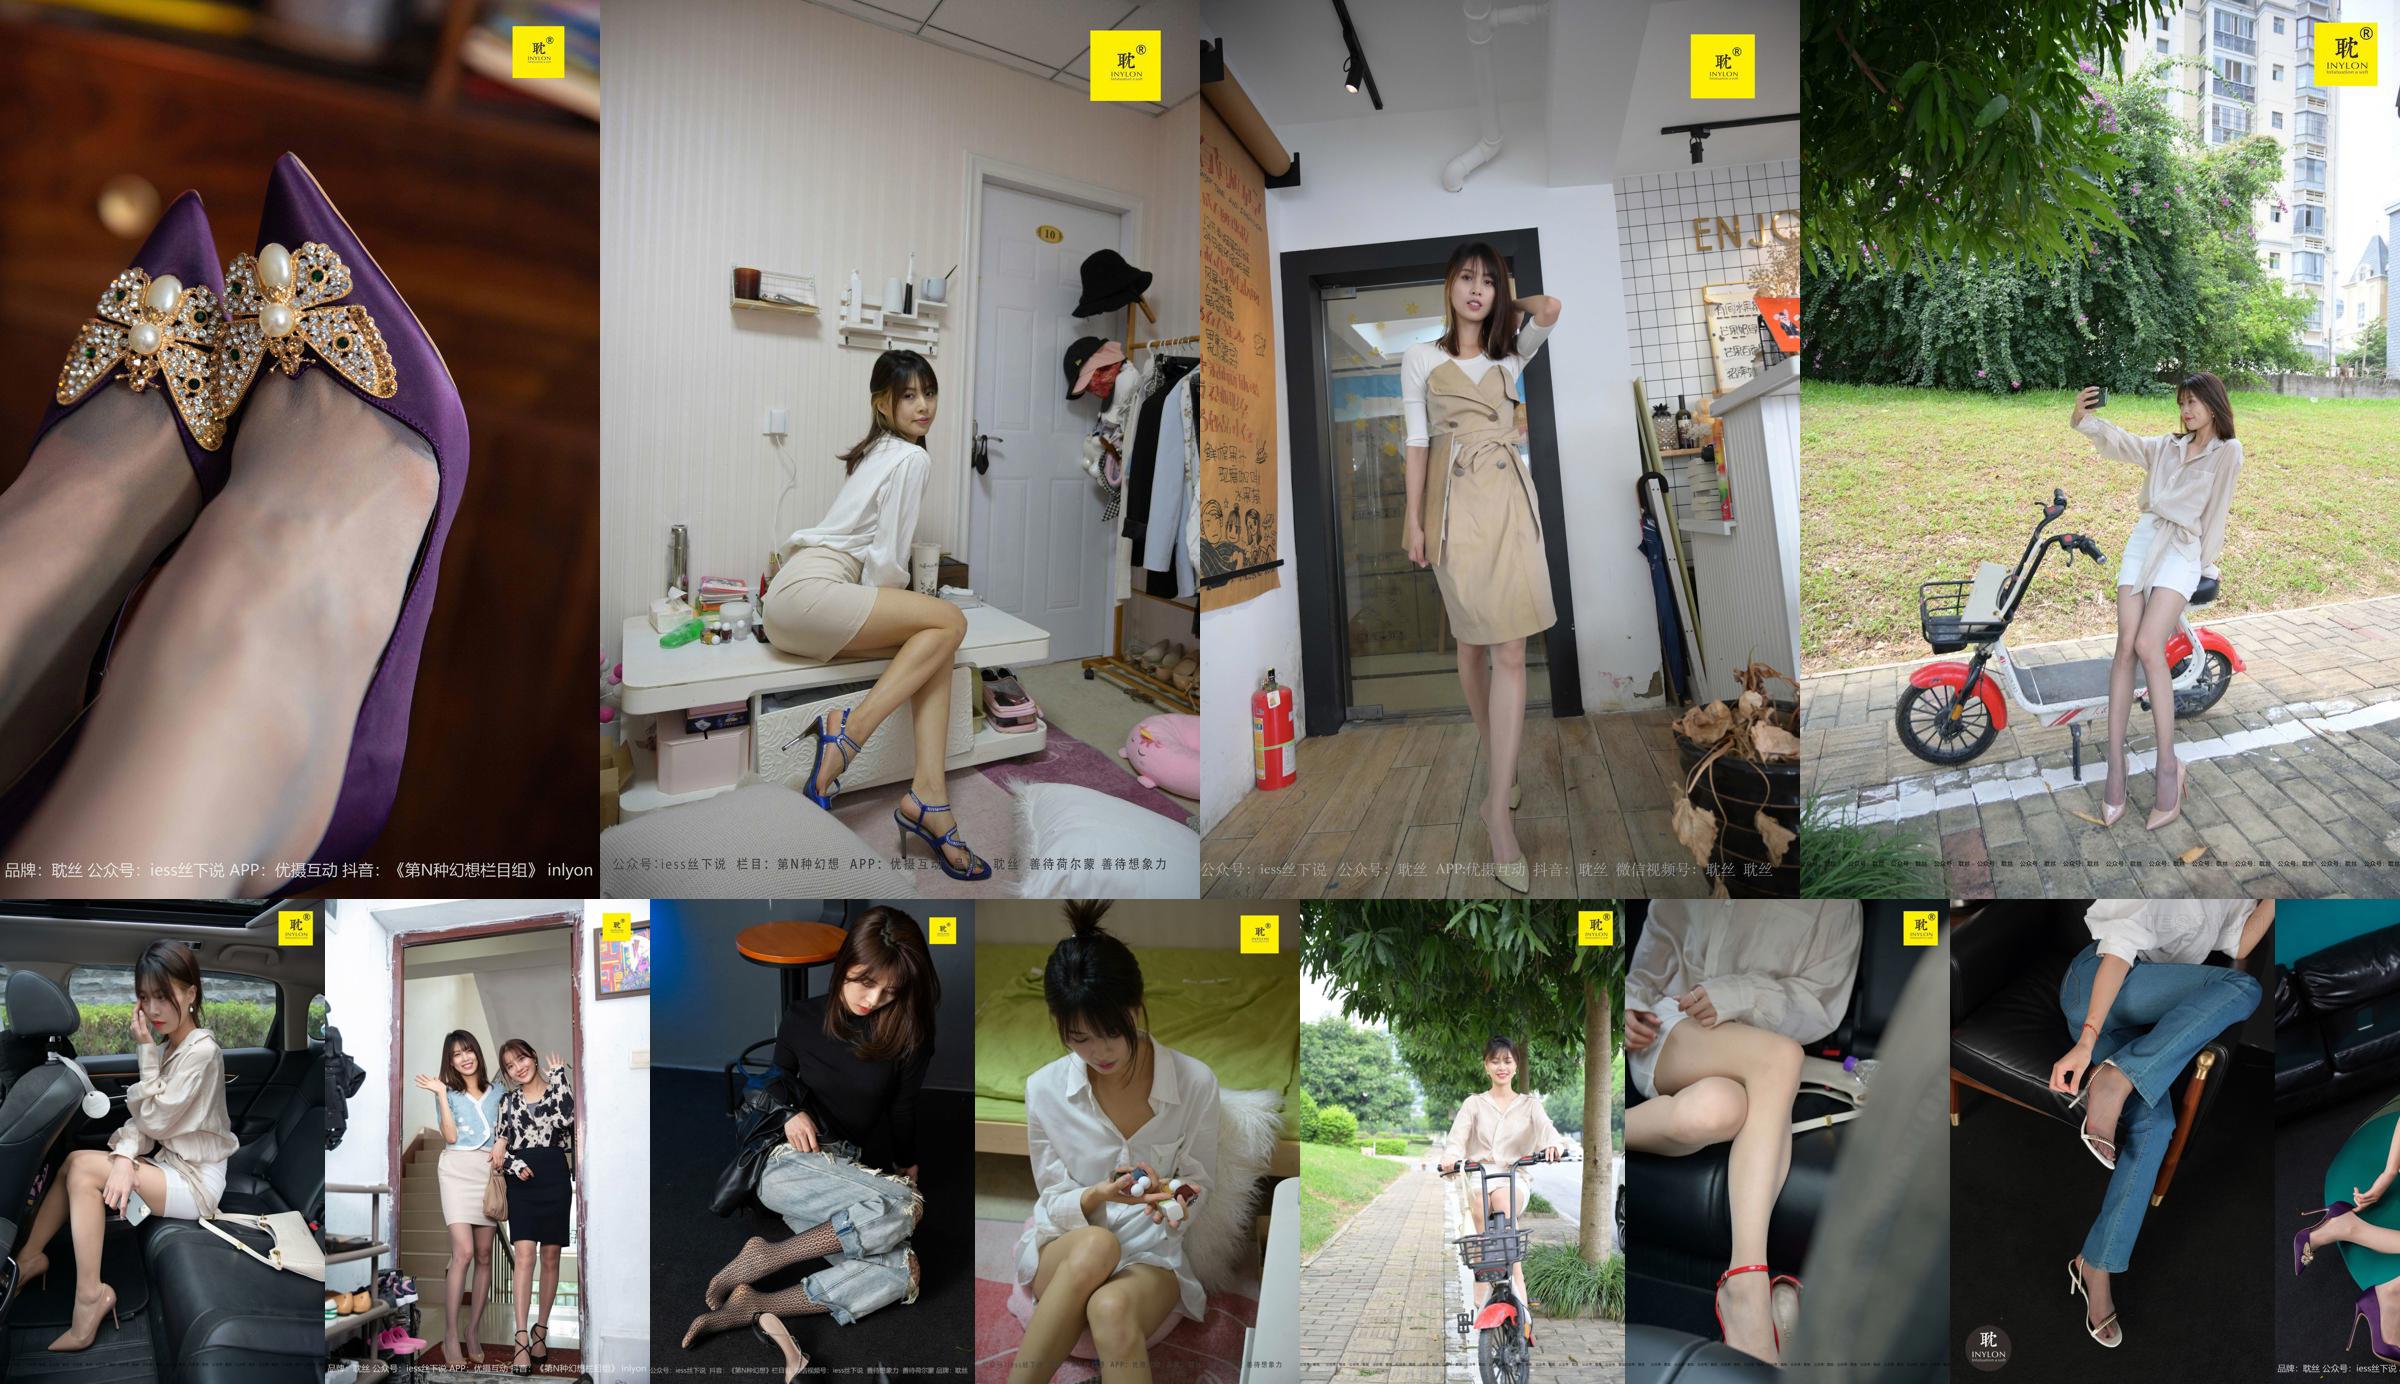 [IESS] Purple High Heels in "The Nth Possibility" ④ Director Qiu, stockings and beautiful legs No.3ead65 Page 1